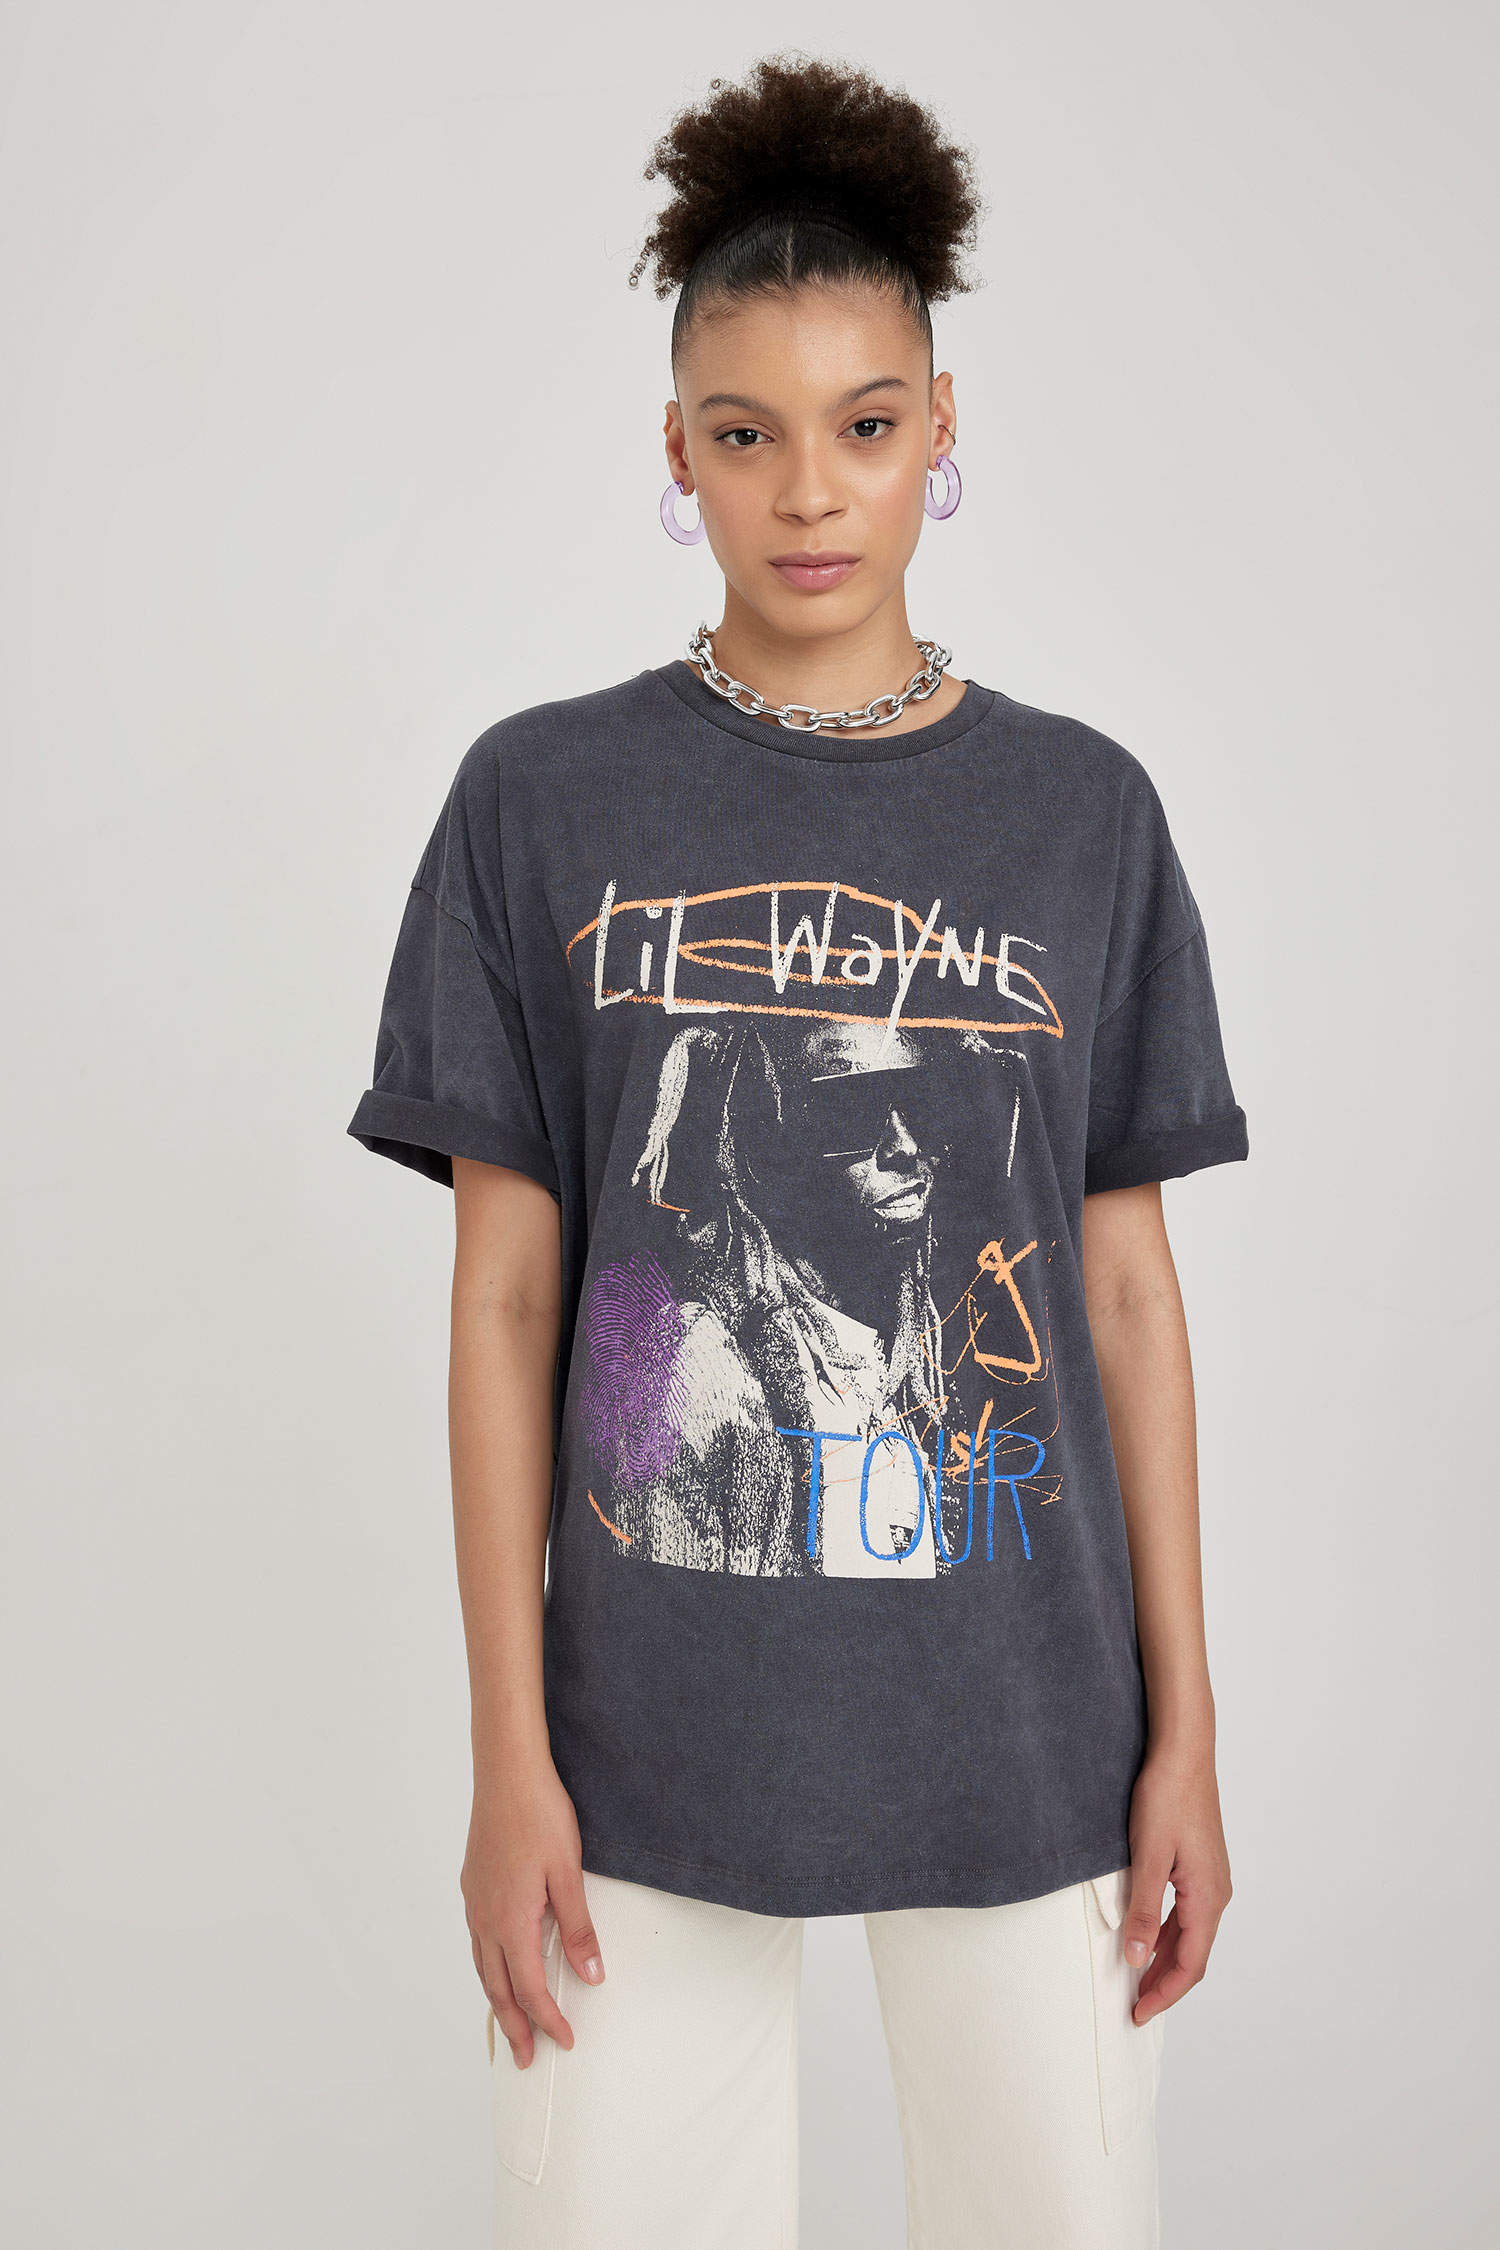 Anthracite WOMAN Oversize Fit Lil Wayne Licensed Printed Short Sleeve T ...